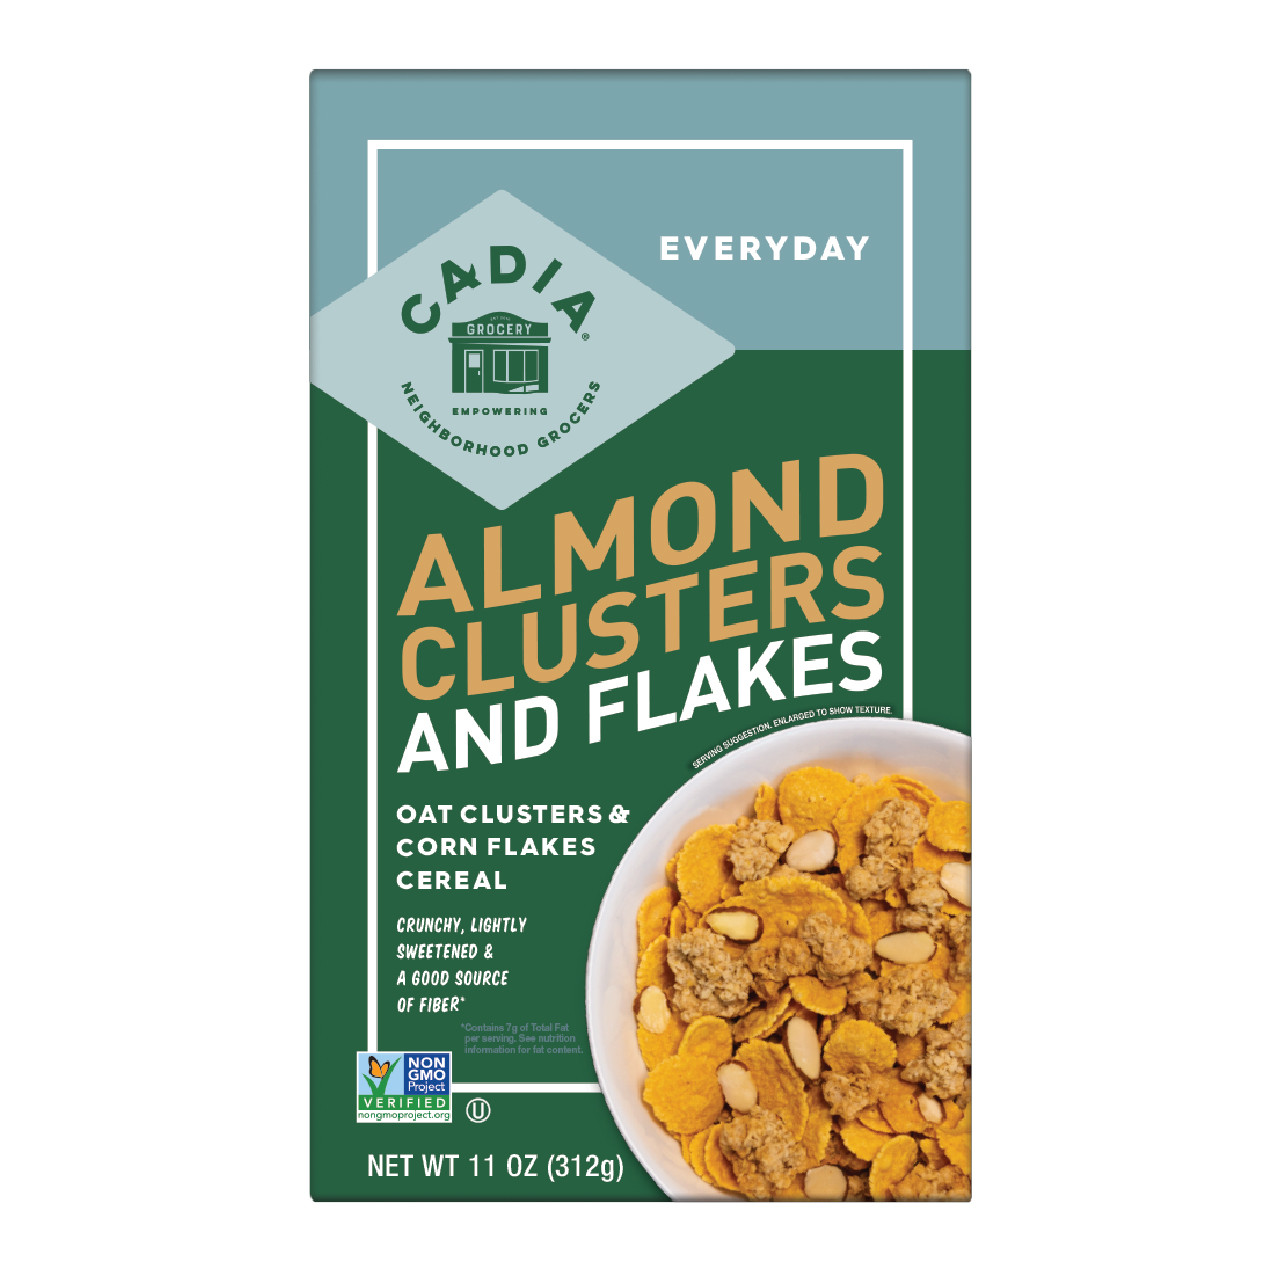 https://cdn11.bigcommerce.com/s-1ly92eod7l/images/stencil/1280x1280/products/882/1453/Product_Cadia-Cereal-Almond-Clusters__96808.1701977568.jpg?c=1&imbypass=on